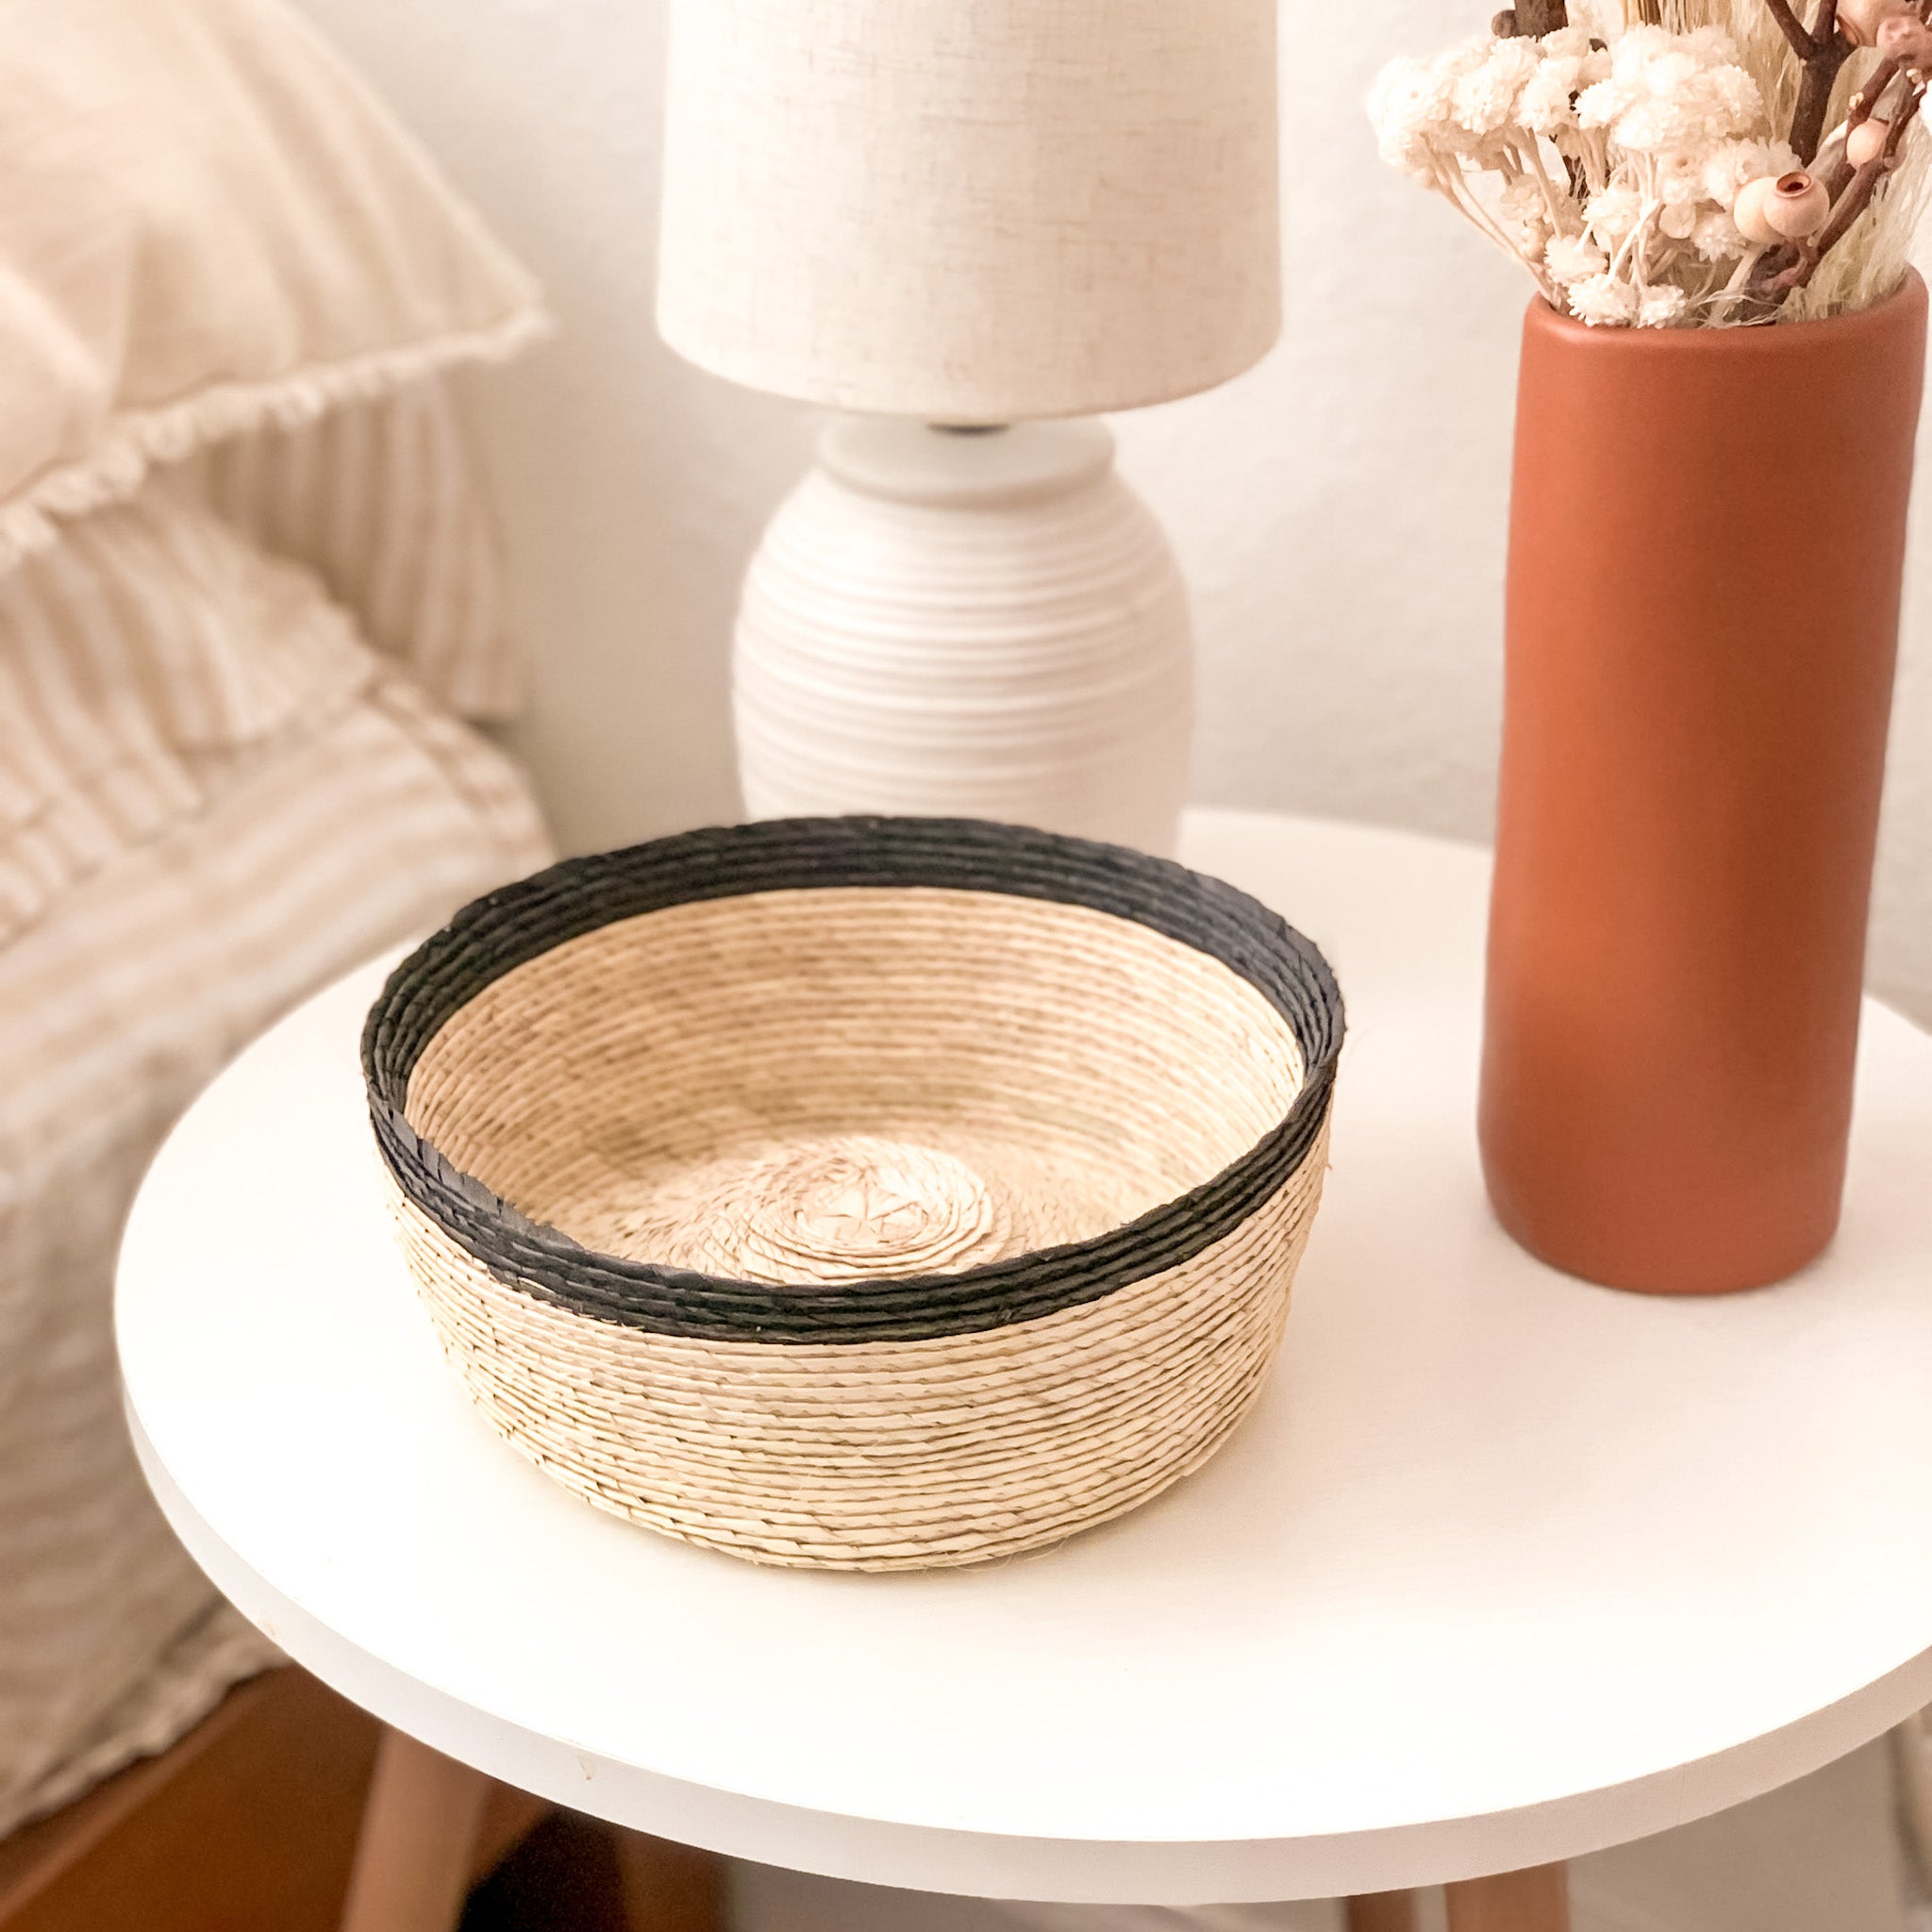 Small catchall basket by Leah